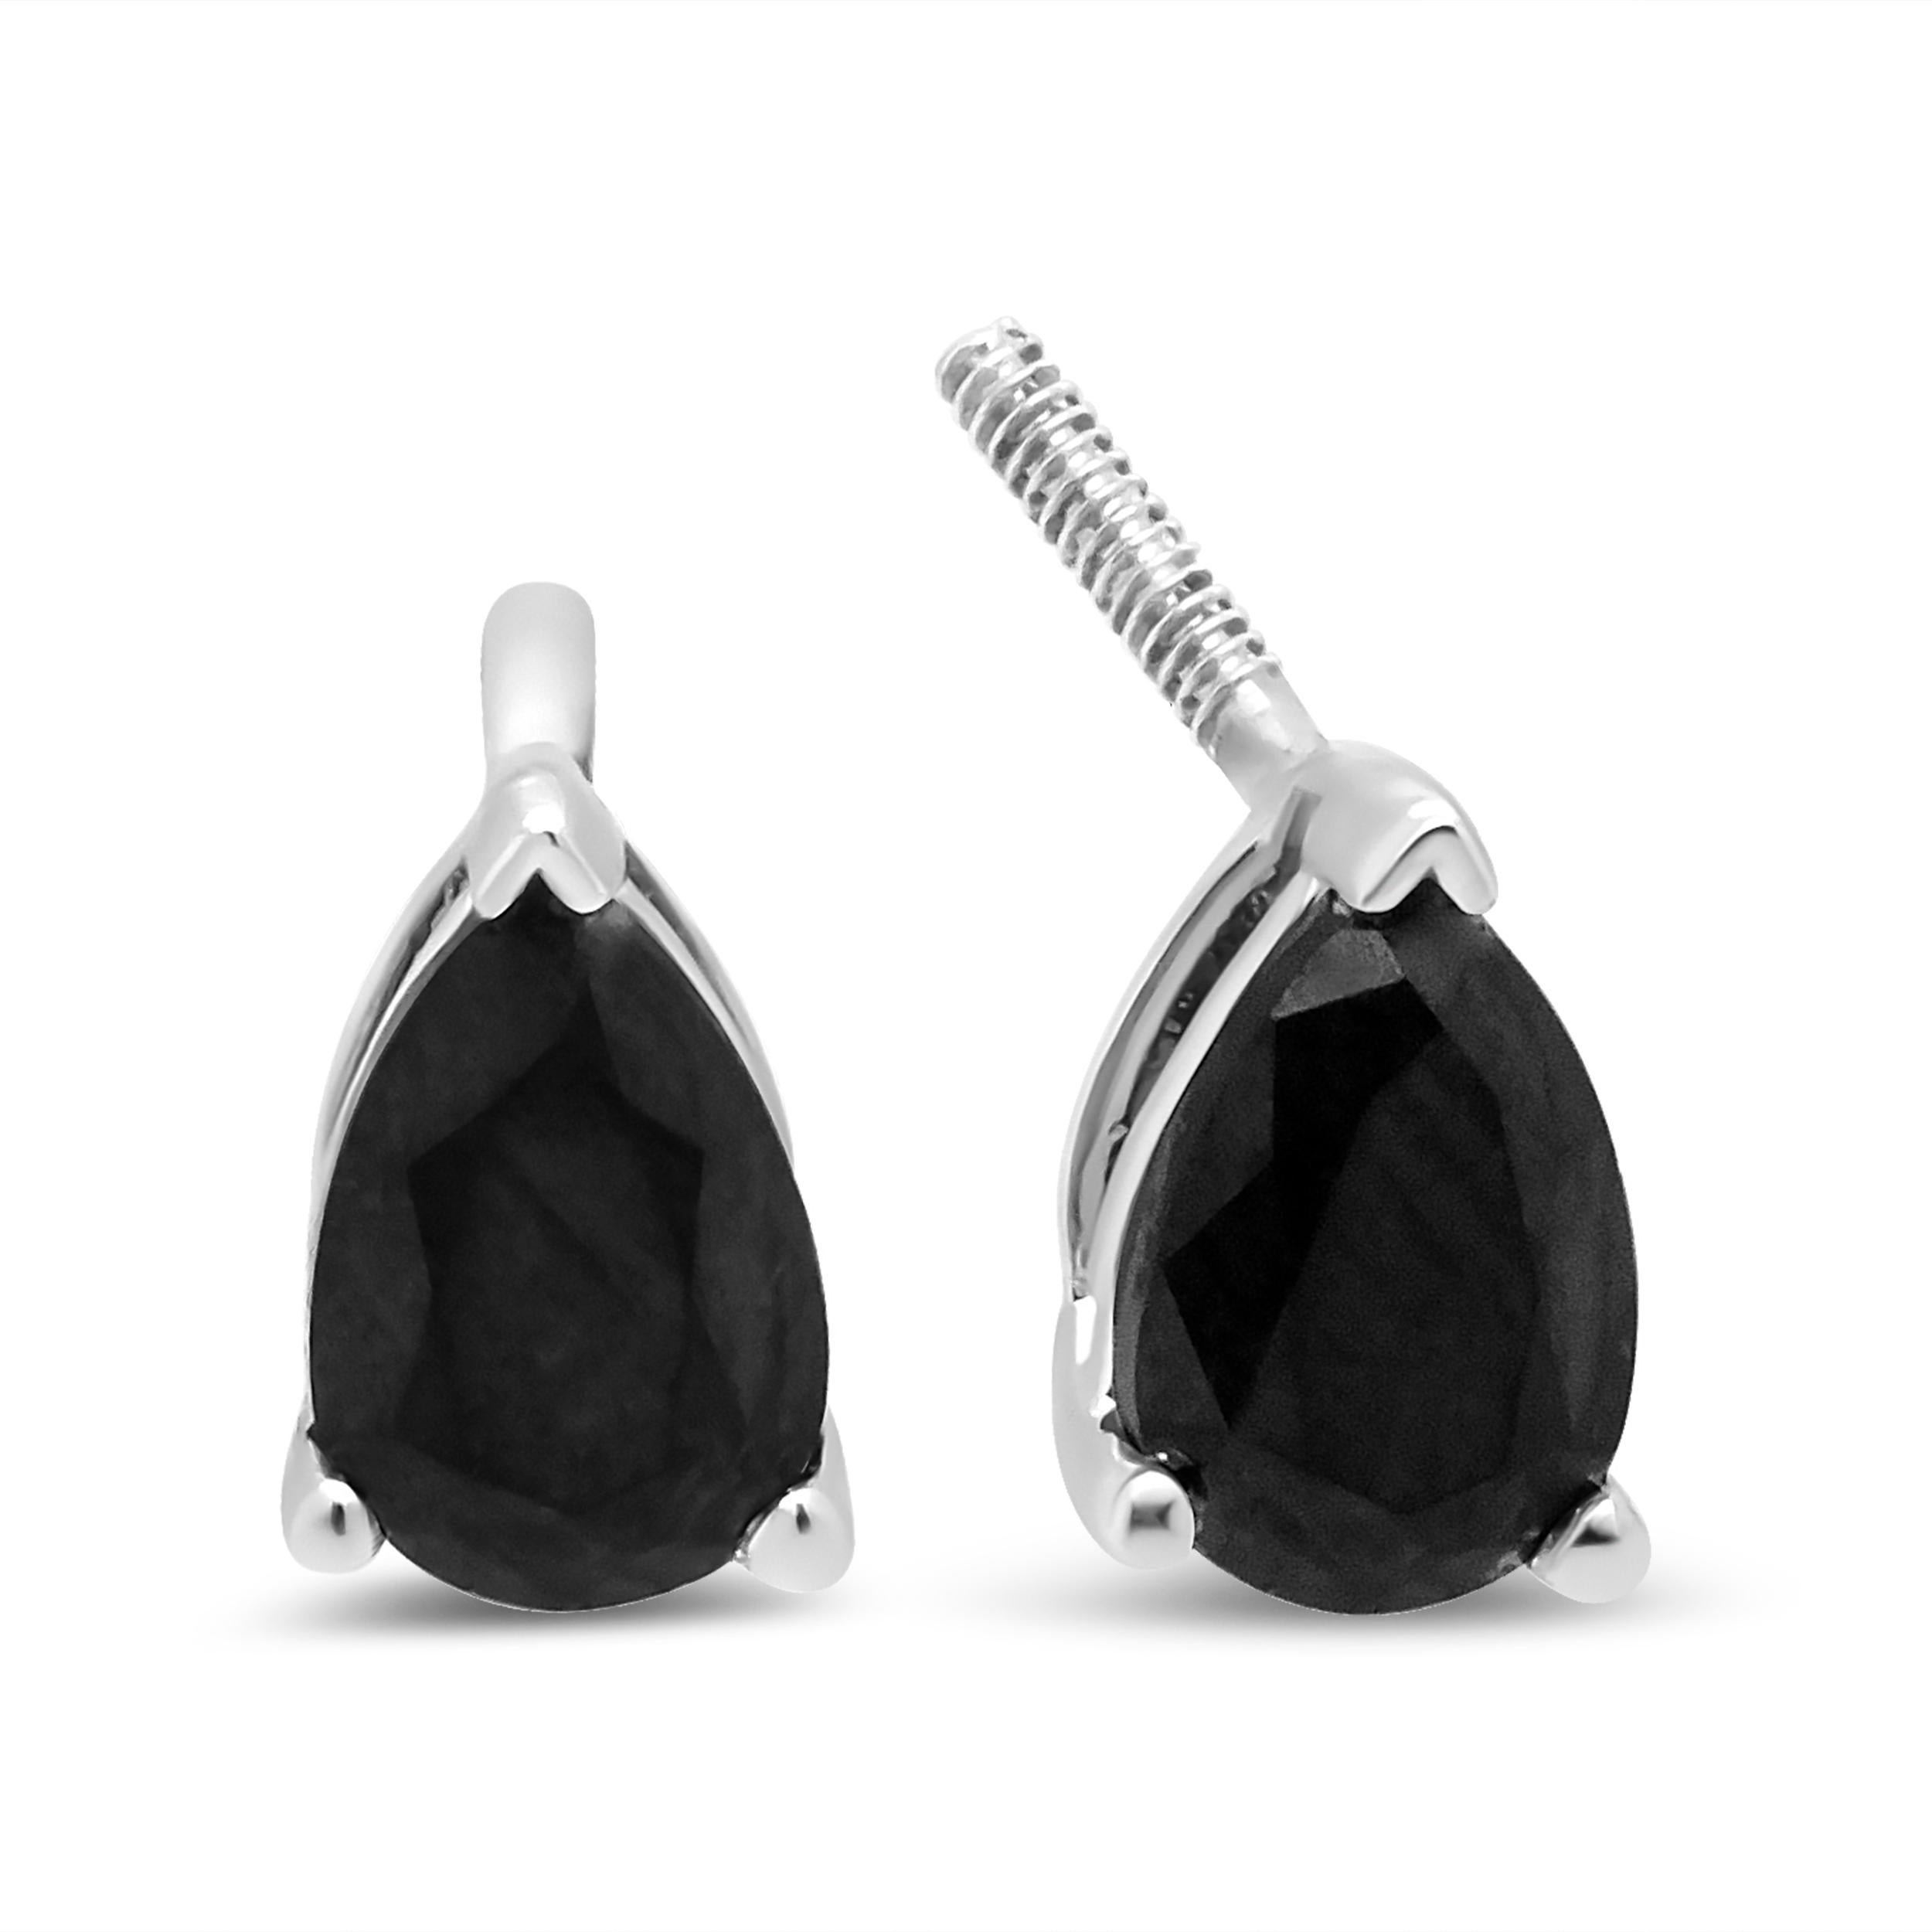 These gorgeous natural diamond solitaire earrings are a classic and timeless design that will be one of your favorite looks to wear. Pear-shaped color treated black diamonds dazzle with faceted splendor from 3-prong settings, totaling 1.0 cttw and